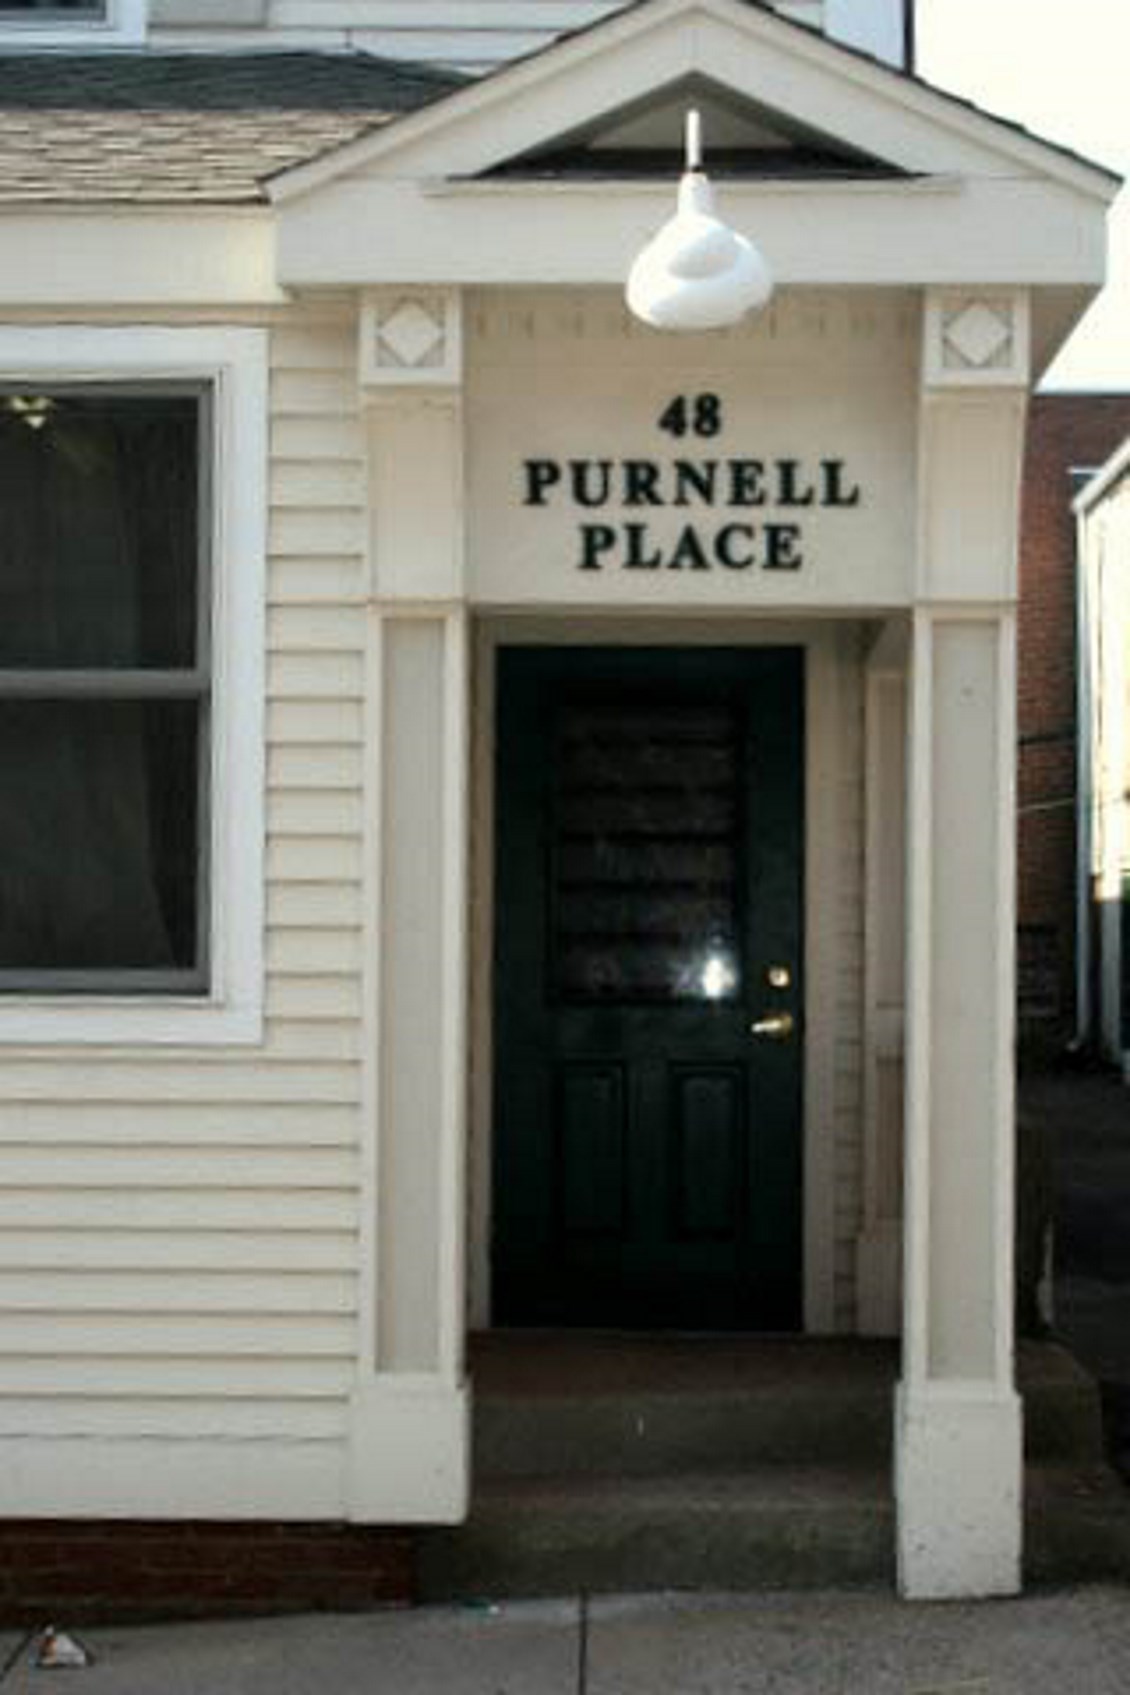 Commercial - Manchester CT - 48 Purnell Place - 1